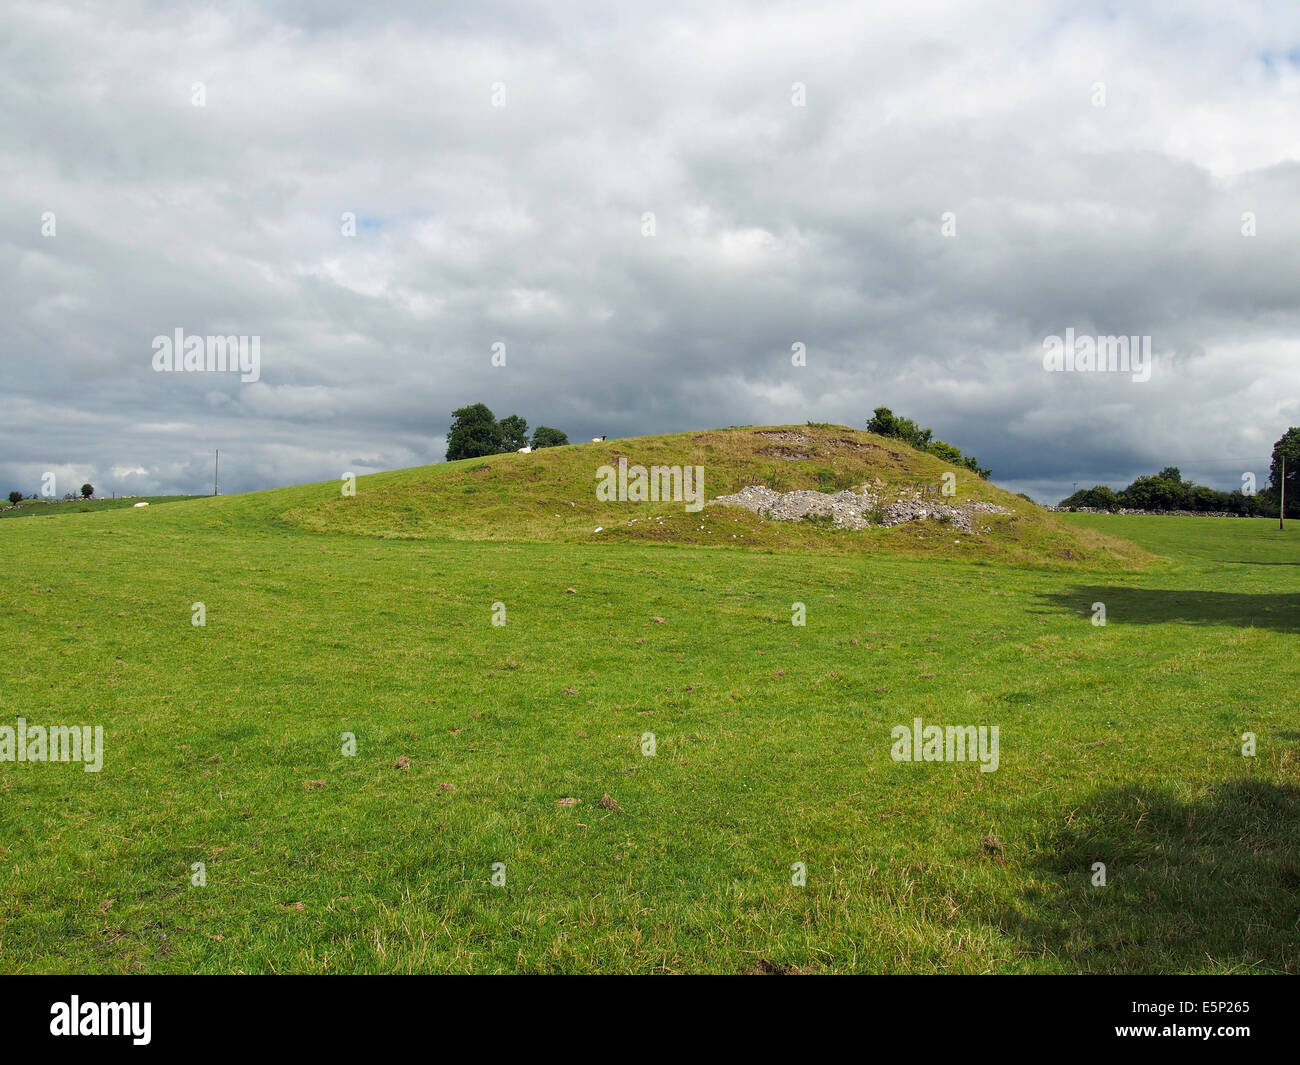 A drumlin, an elongated hill in the shape of an inverted egg is a glacial landform. This example near Dunmore, Galway, Ireland. Stock Photo